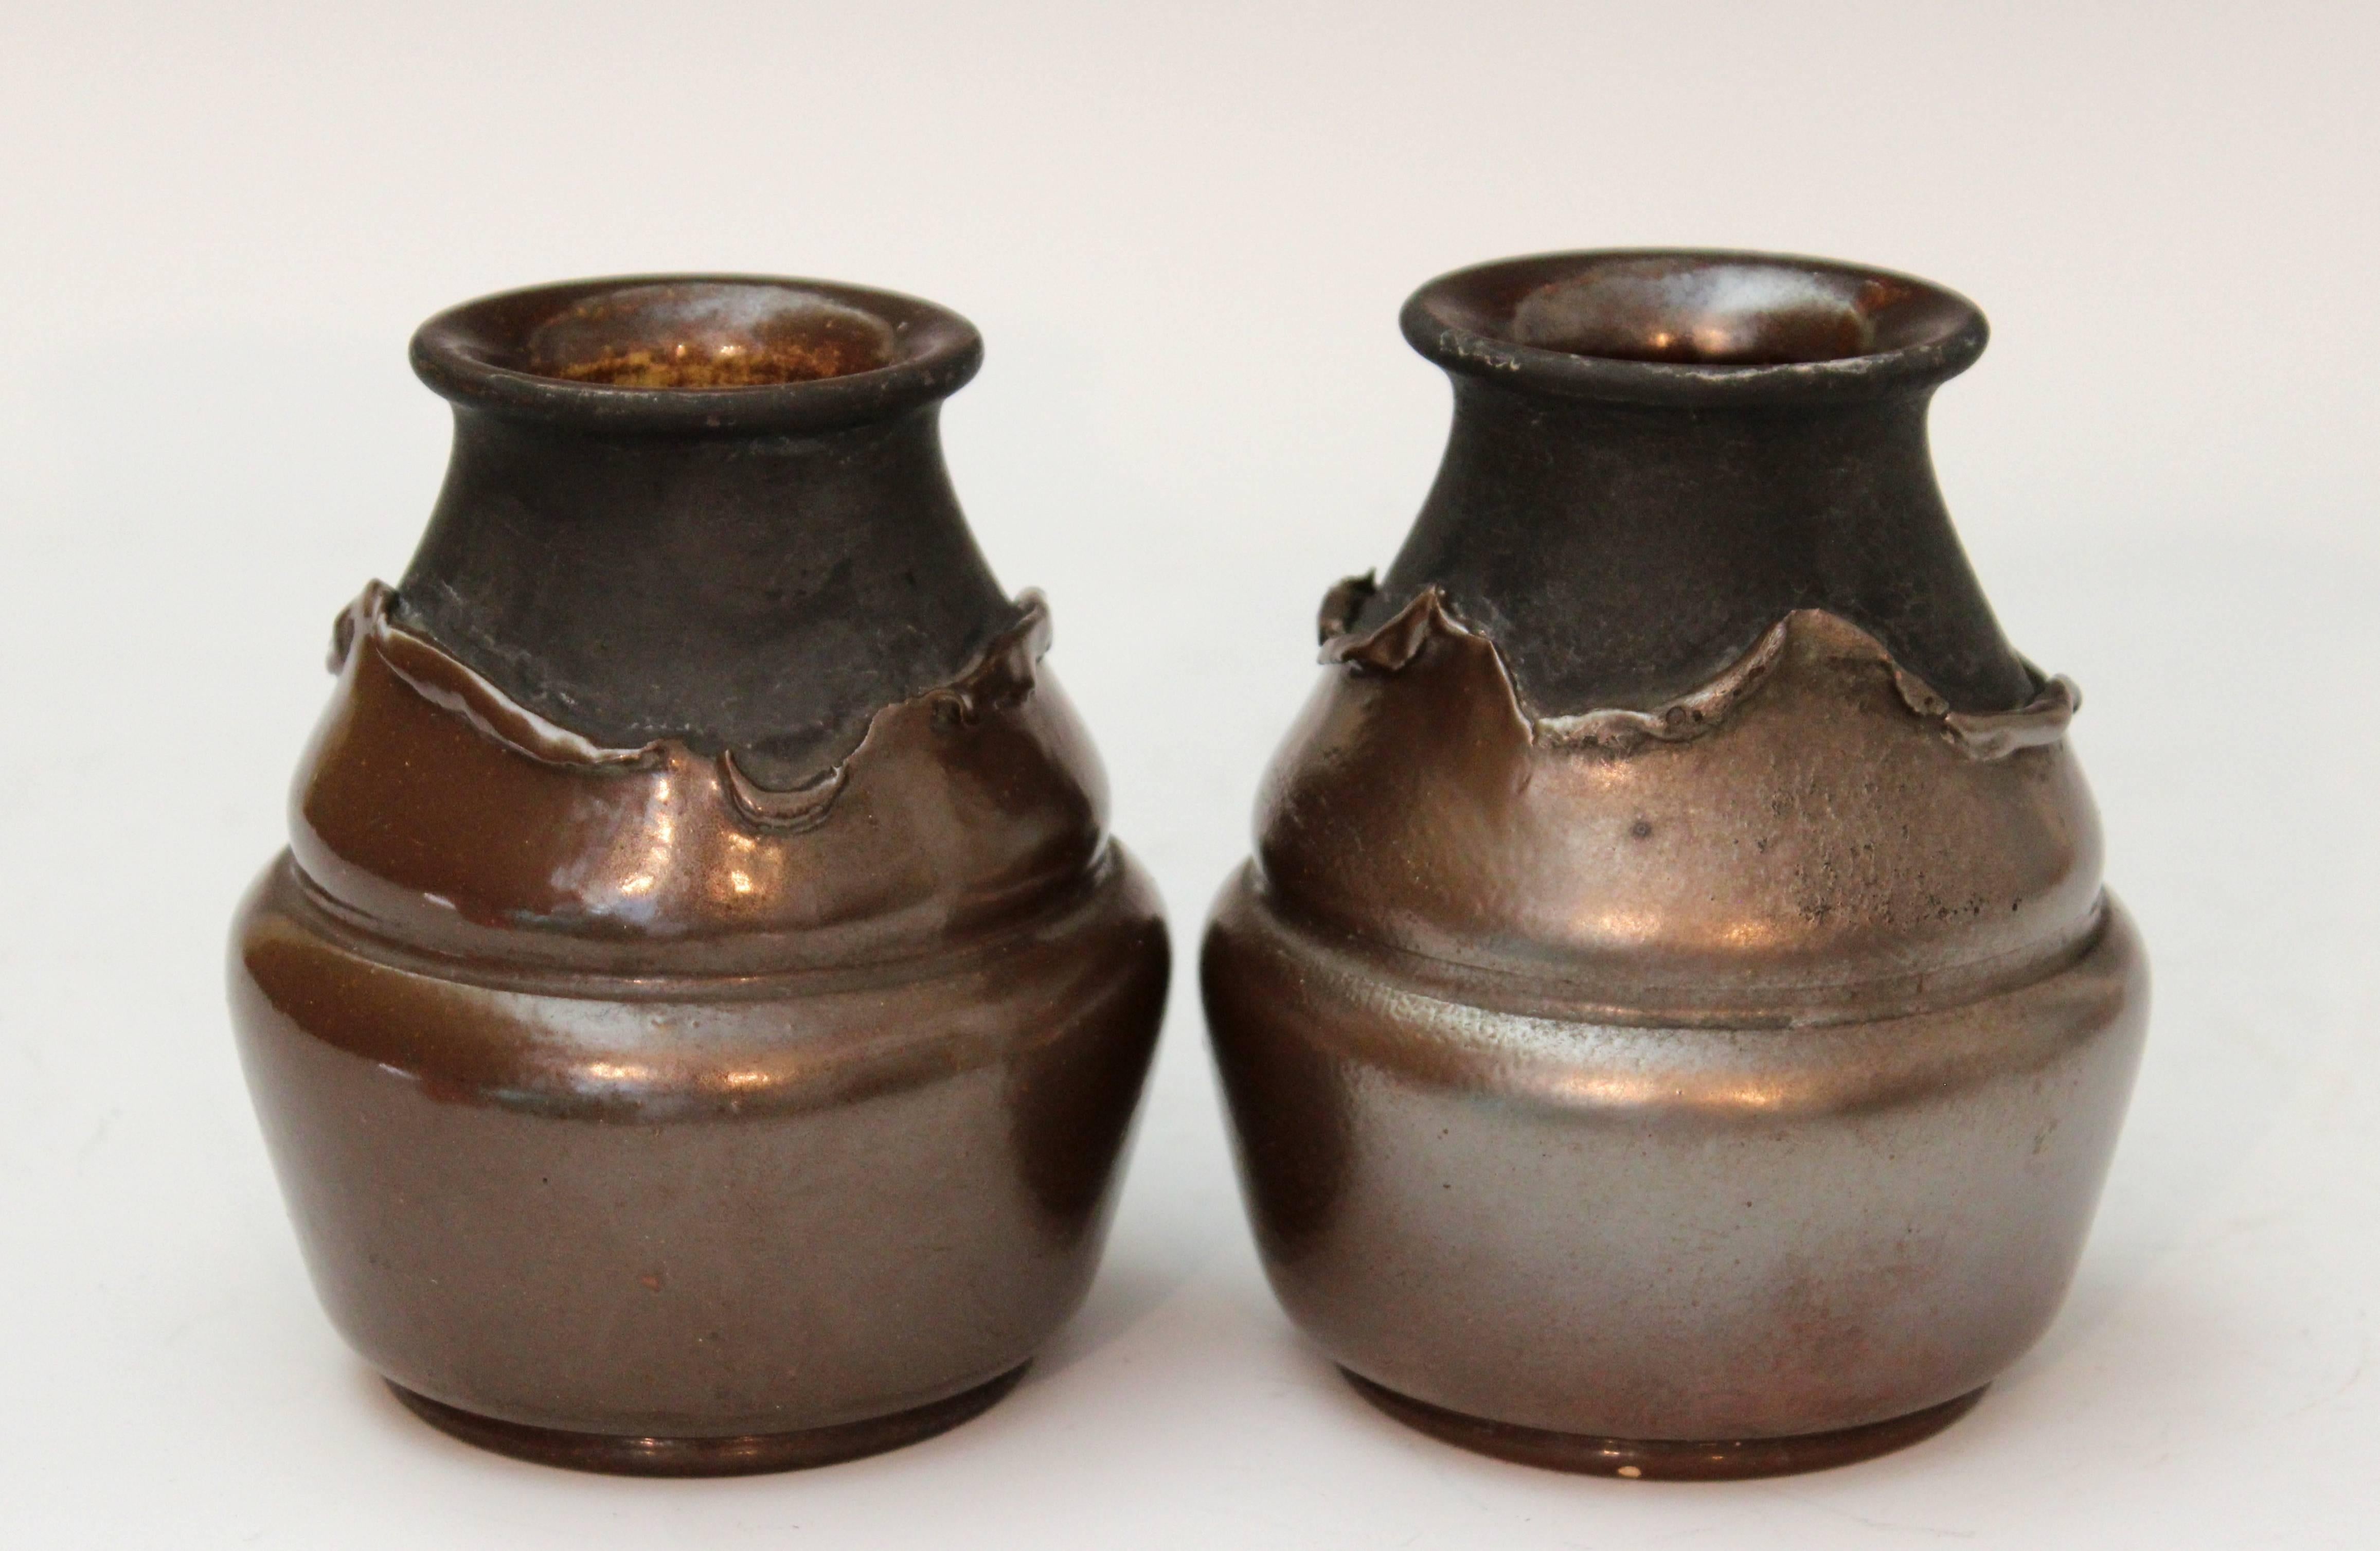 Pair of antique hand-turned Bretby Arts and Crafts vases cleverly glazed to appear as if copper cladding is peeling away from the body, circa 1900. 4 1/2